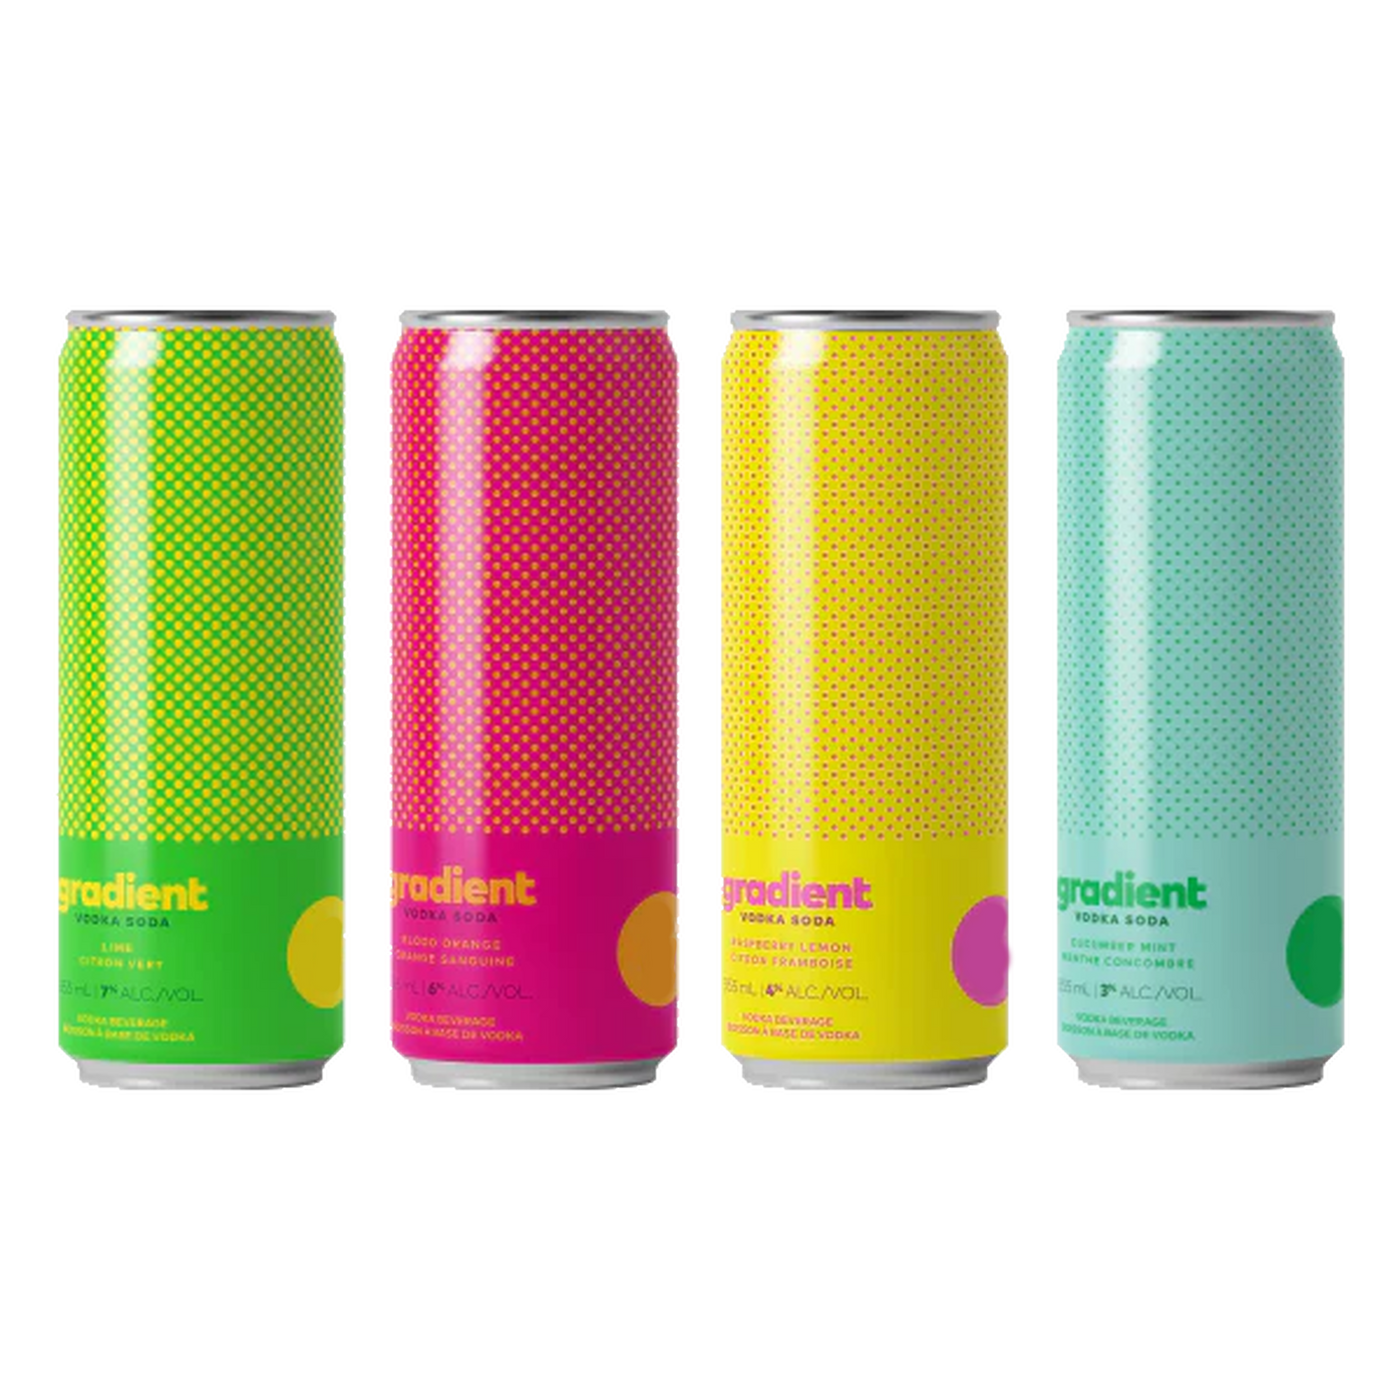 Gradient Vodka Sodas - 0% variety pack - alcohol free vodka drinks for any occasion - hangover free - healthy living